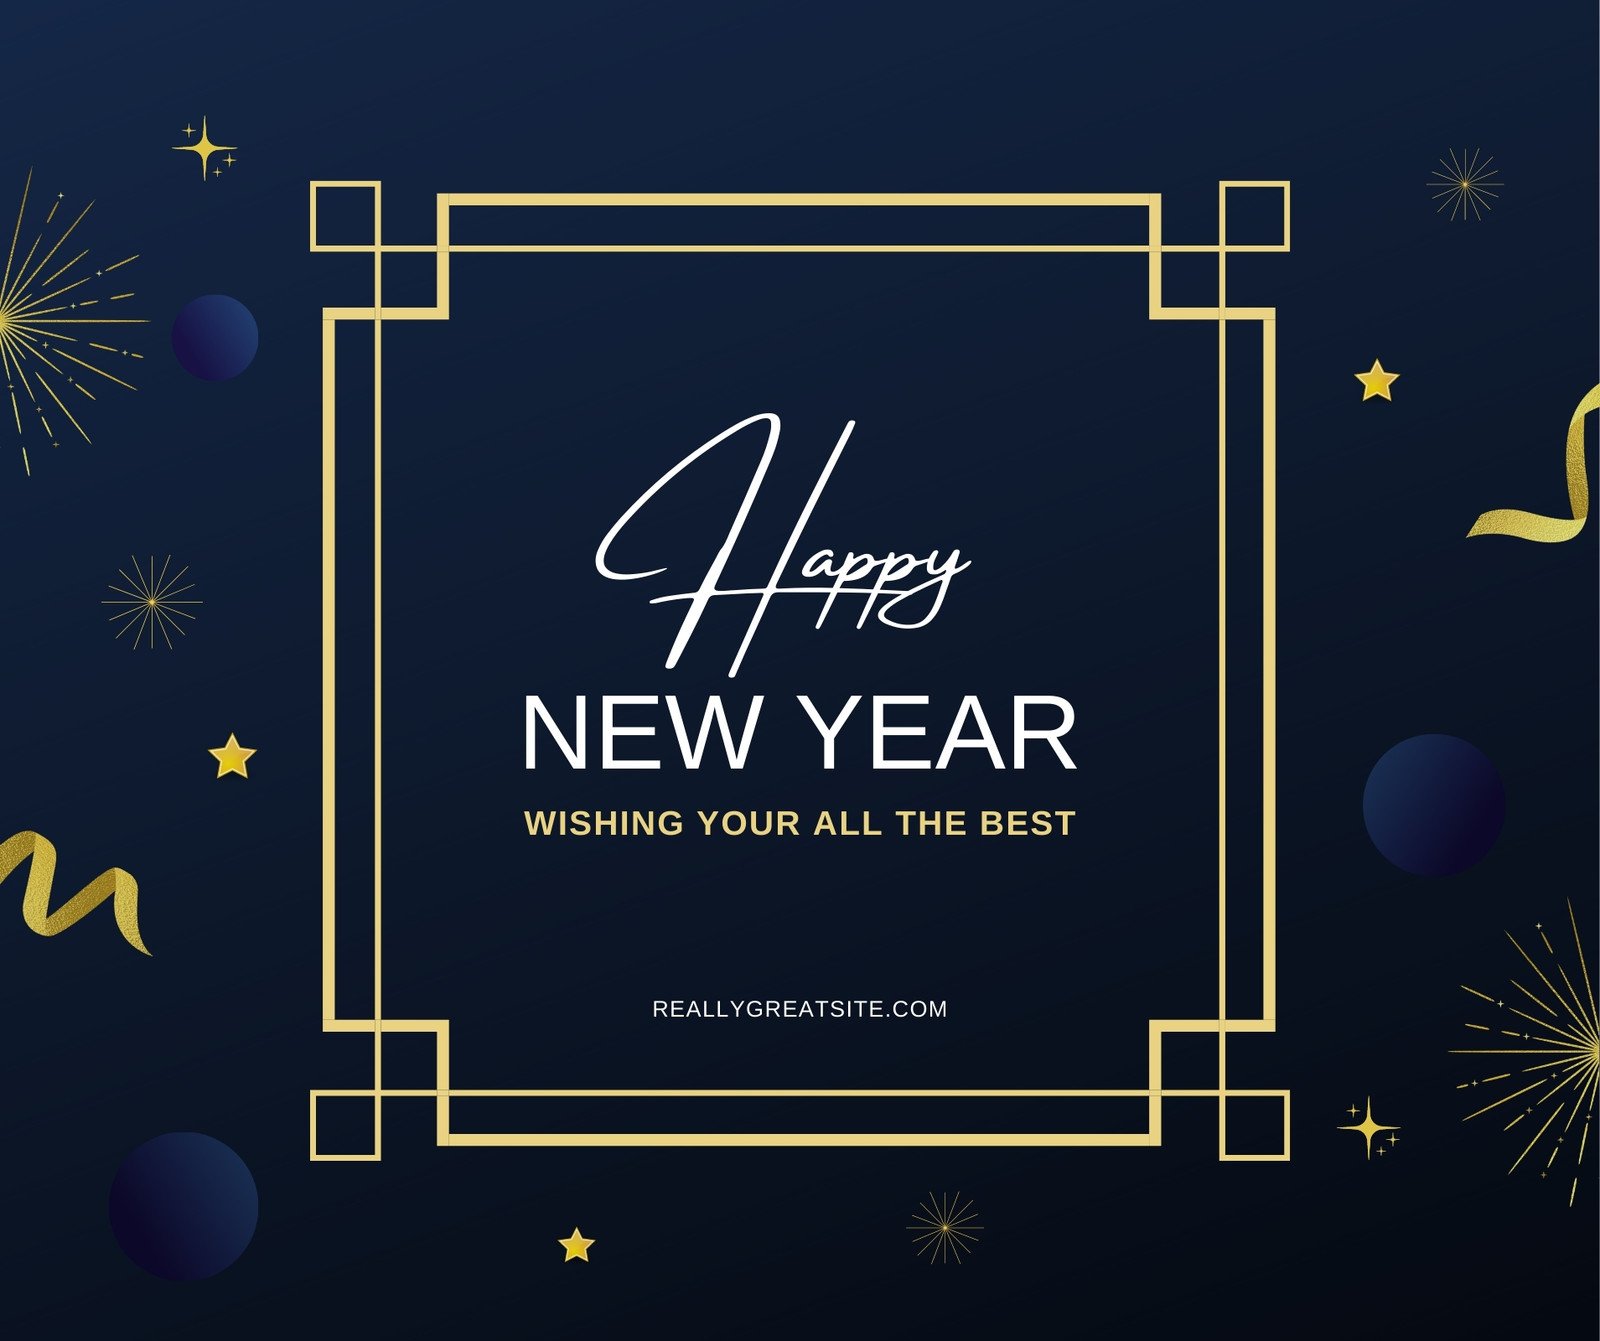 Free and customizable new year wishes templates